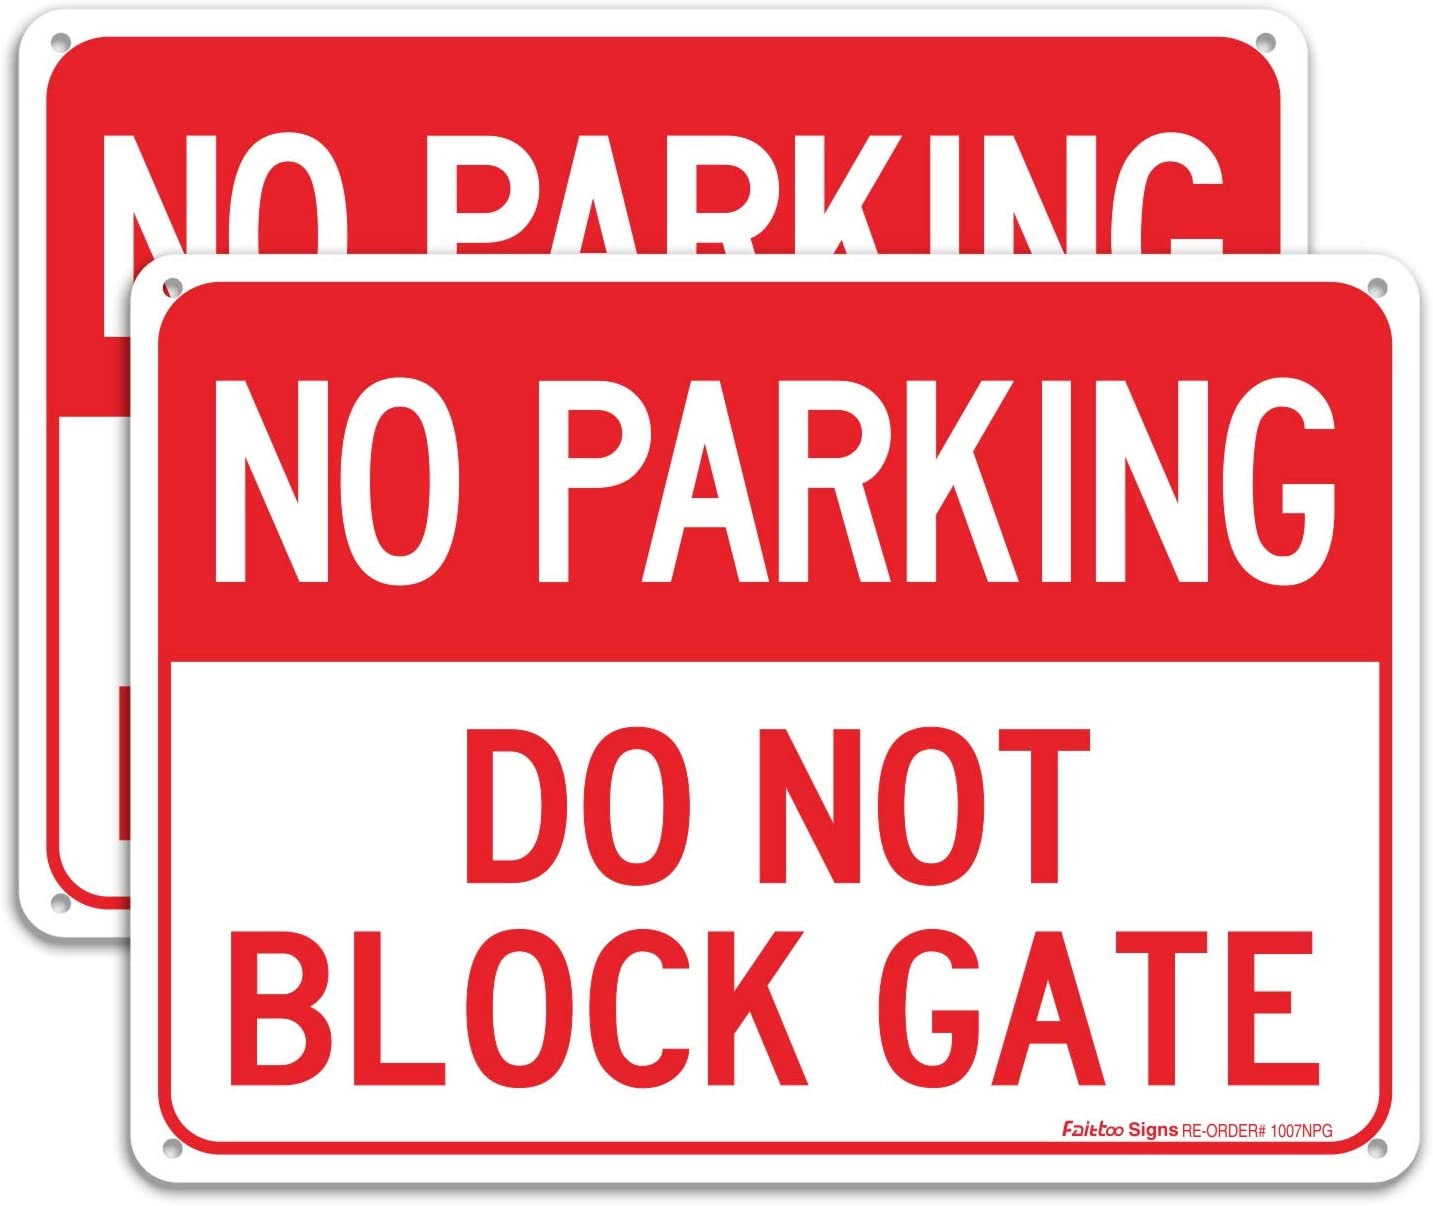 (2 pack) Faittoo No Parking Do Not Block Gate Sign, 10 x 7 Inches rectangle, .040 Rust Free Aluminum, UV Protected and Waterproof, Weather Resistant, Durable Ink, Easy to Mount